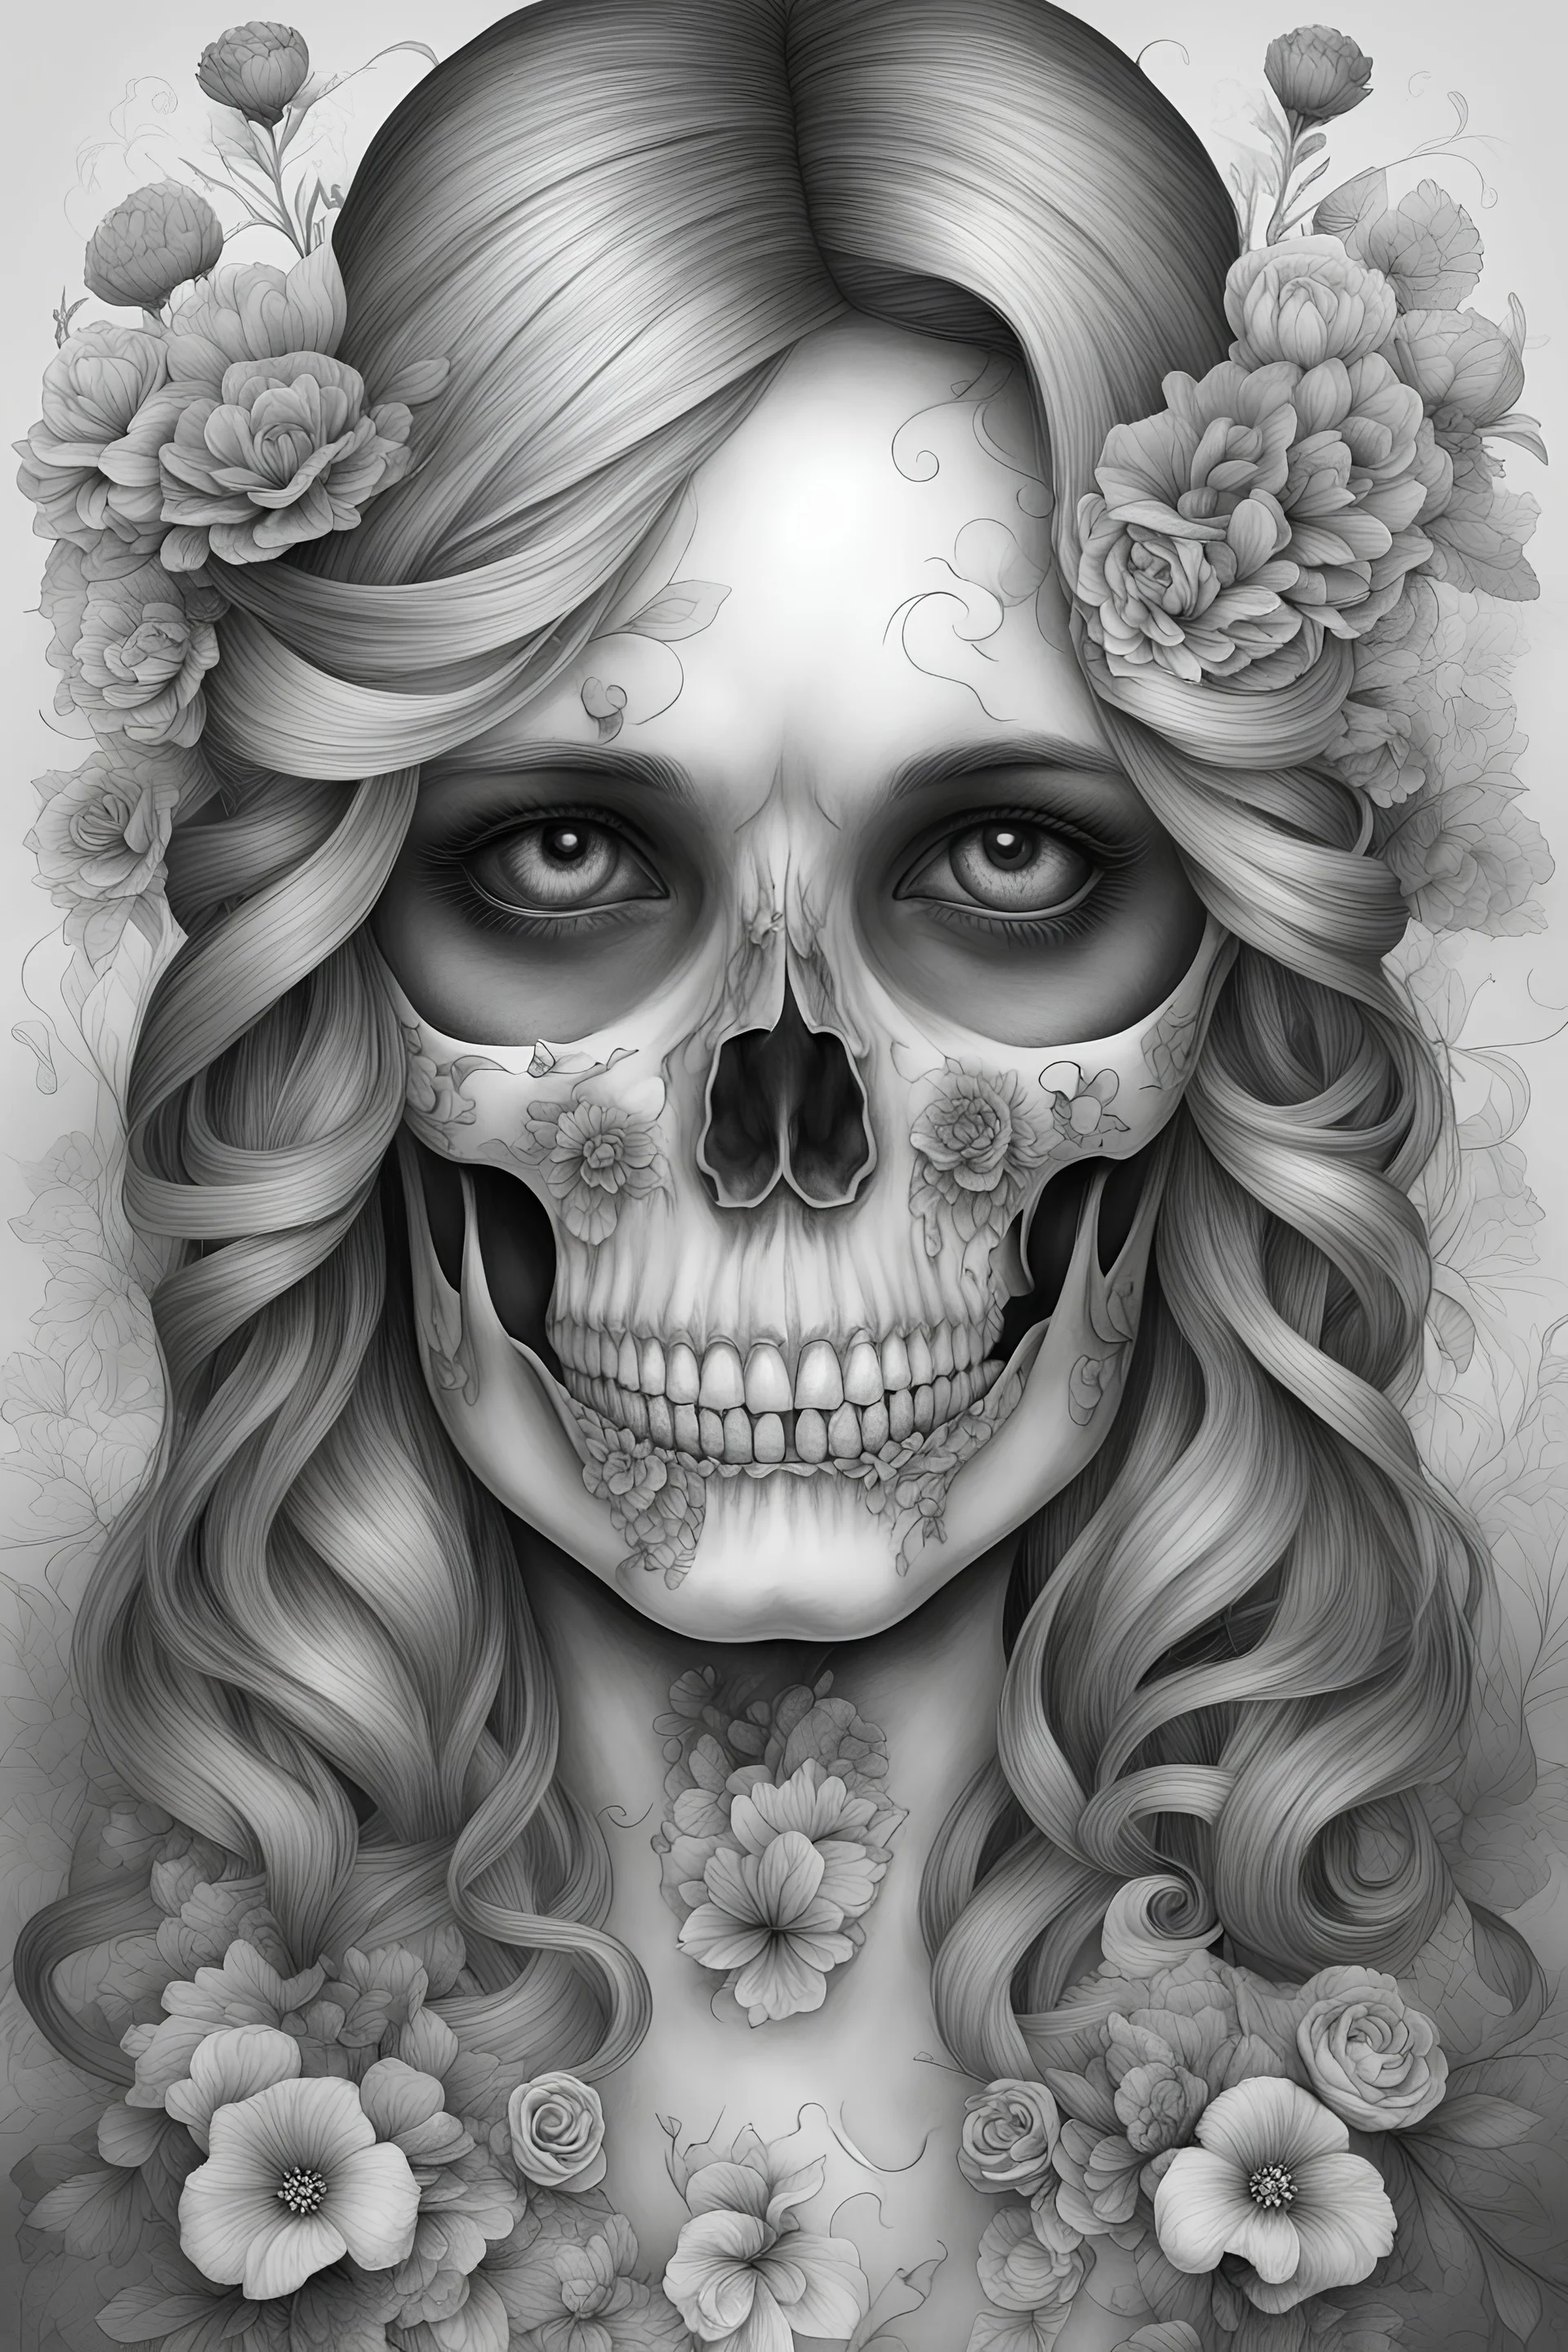 Skull | Mariola Budek - Premium Coloring Page | Printable Adult Colouring Pages Book Instant Download Grayscale WITH GIRL